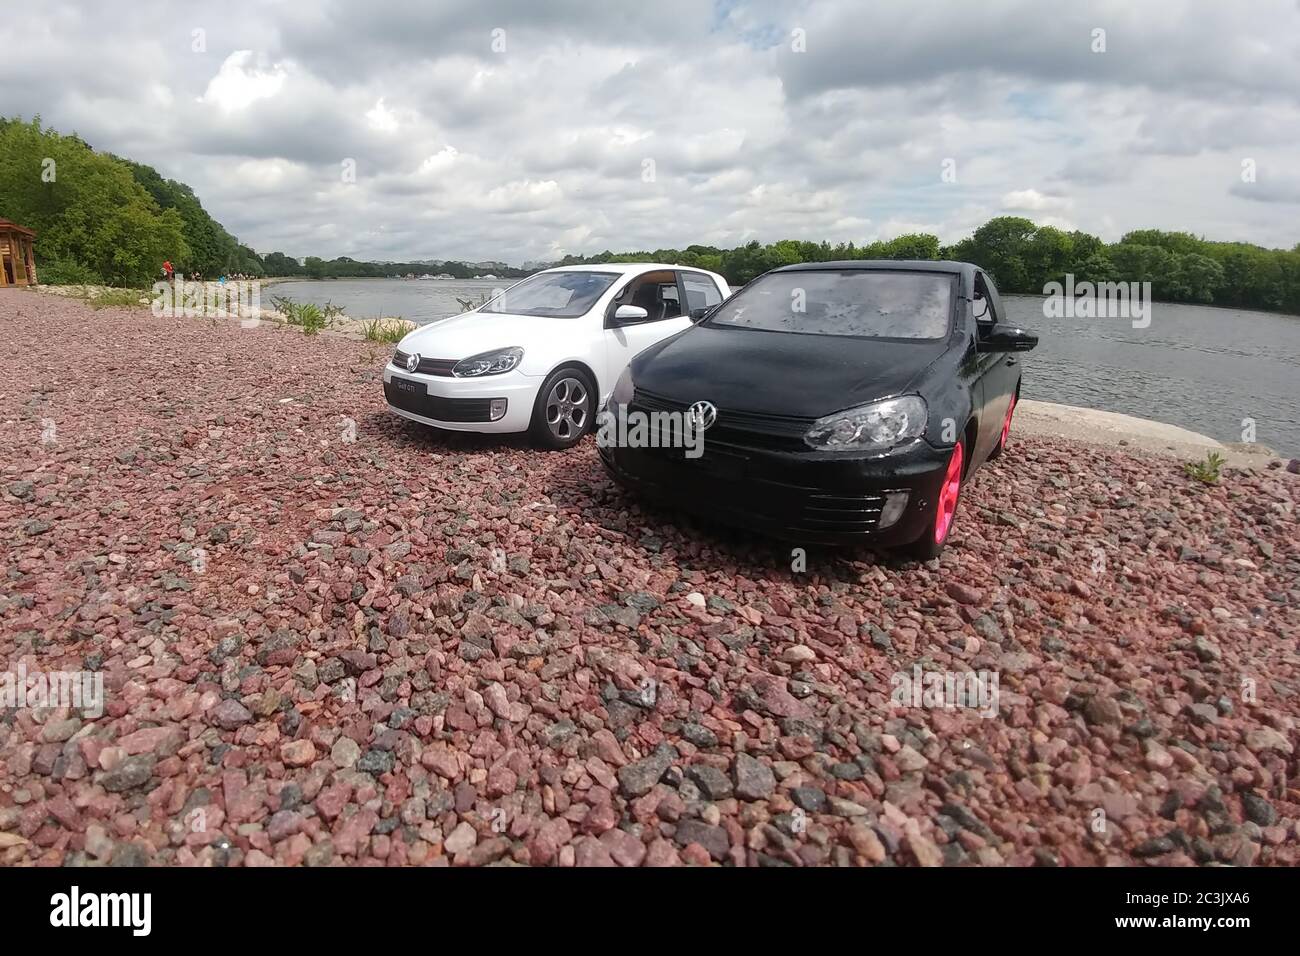 Moscow, Russia - May 03, 2019: Two toy cars in river park. 2 Volkswagen golf mk6 stand on a pebble beach. White and black GTI stand next to each other. Stock Photo